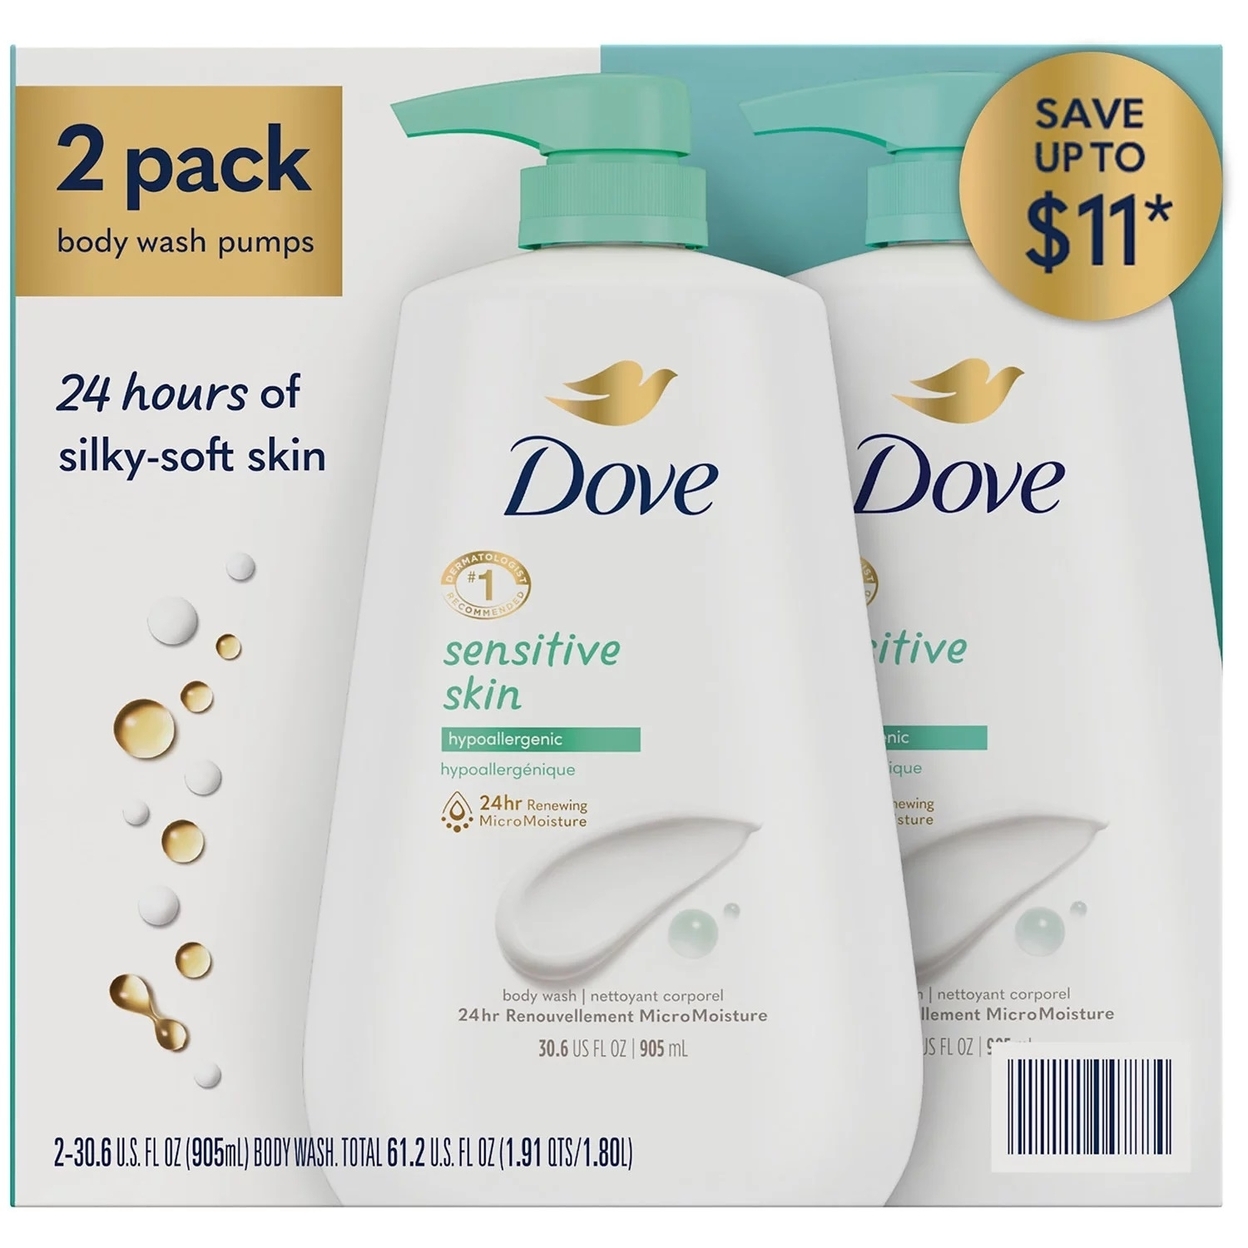 Dove Sensitive Skin Hypoallergenic Body Wash, 30.6 Fluid Ounce (Pack Of 2)